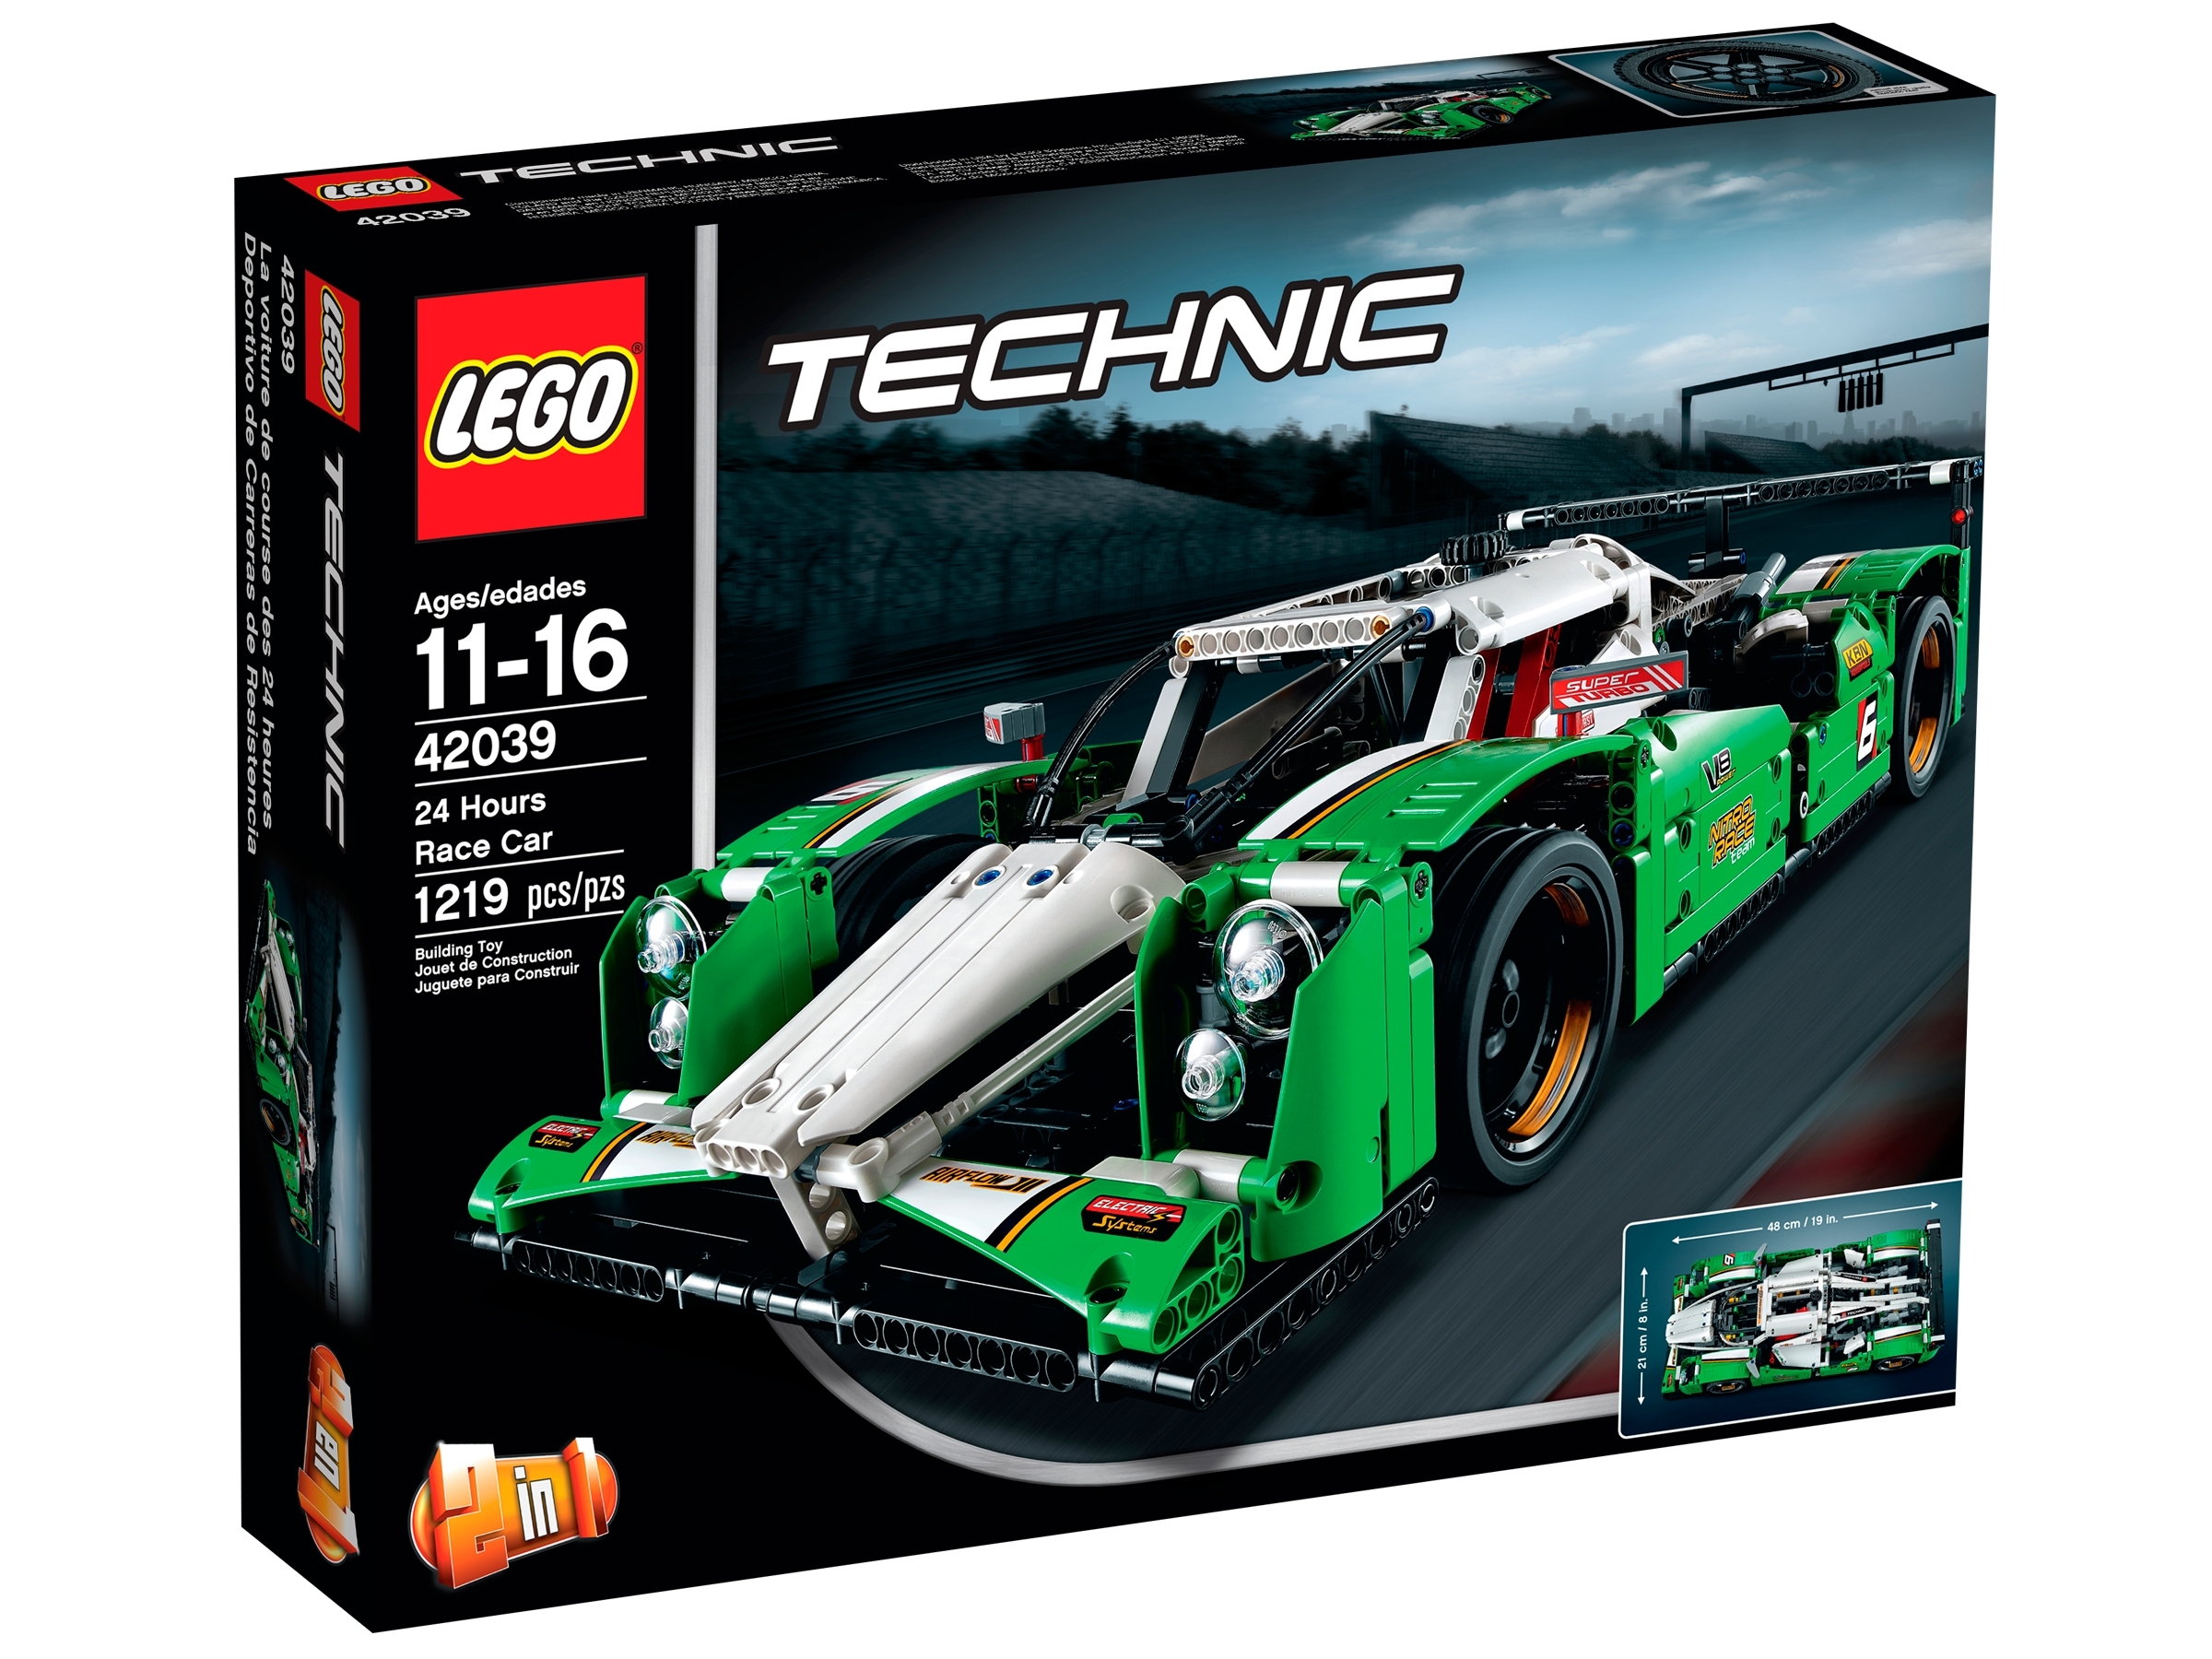 Ungkarl alarm ø 24 Hours Race Car 42039 | Technic™ | Buy online at the Official LEGO® Shop  US